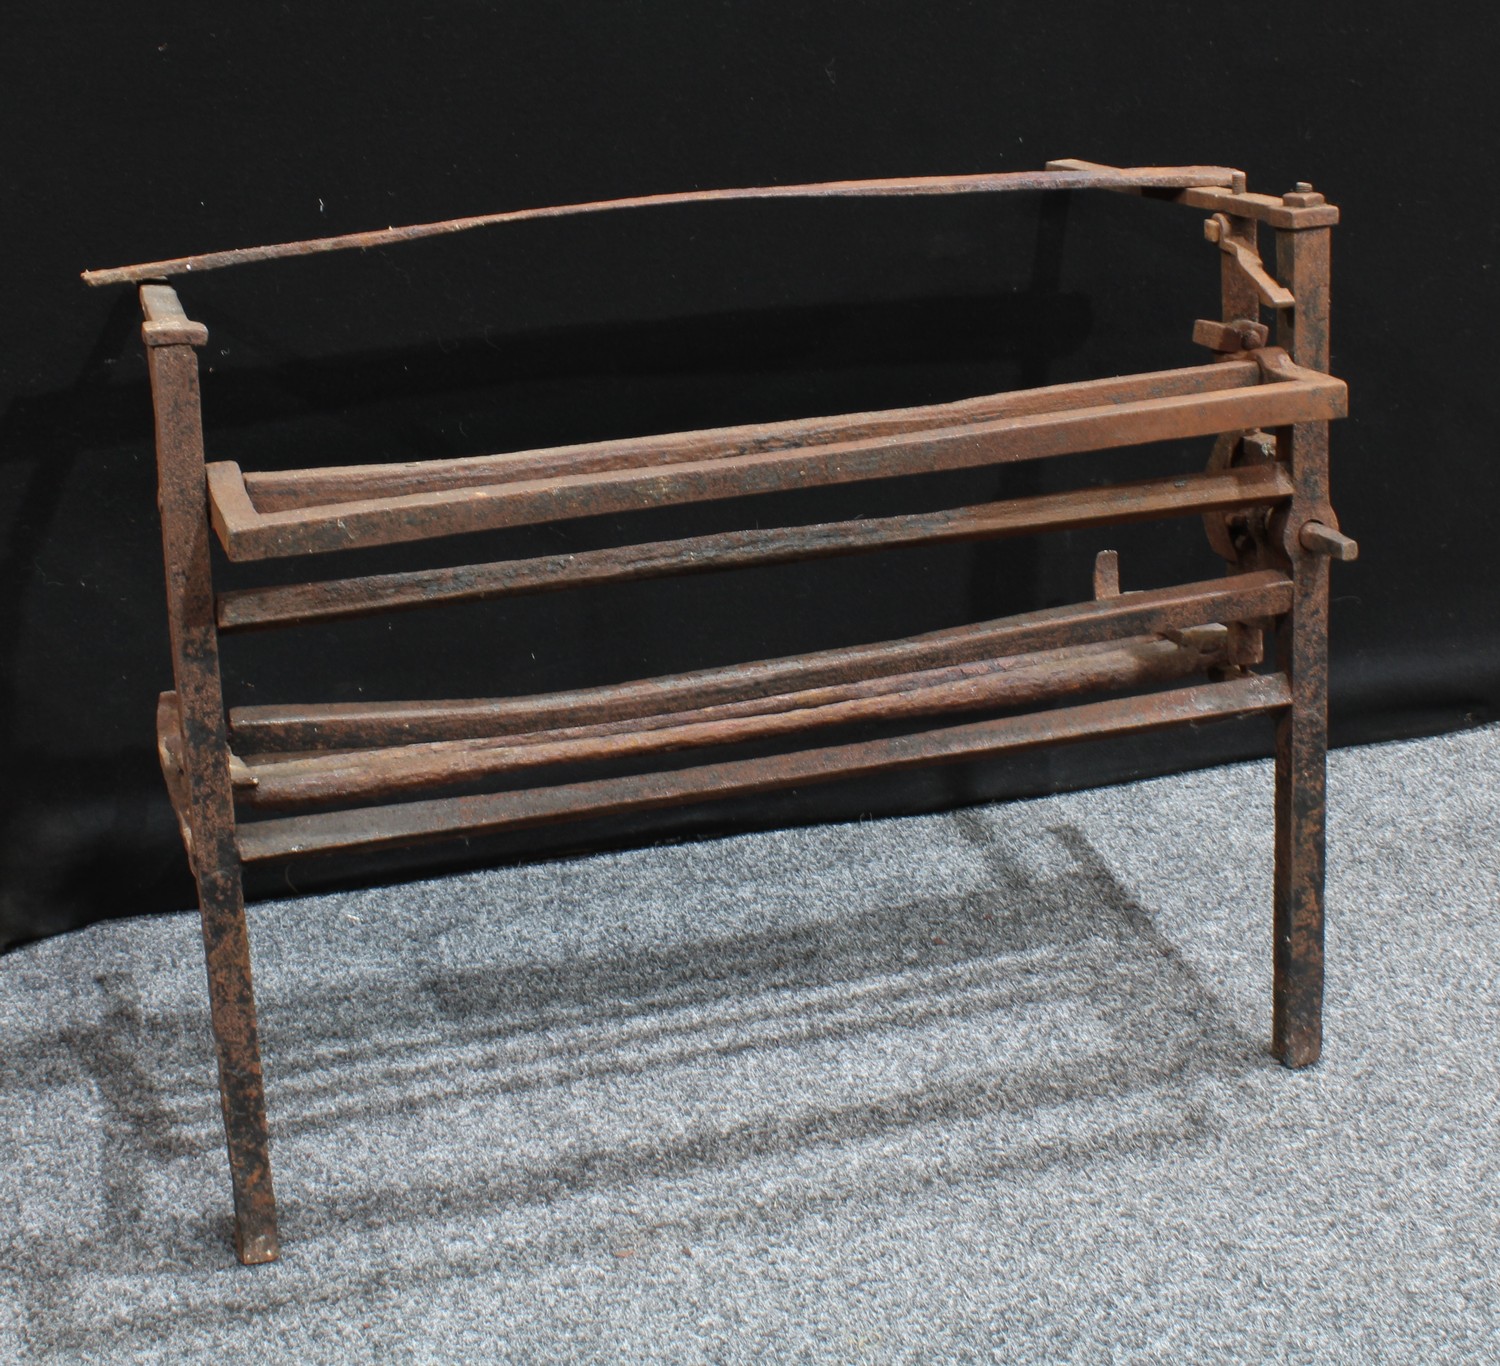 A country house cast iron fireplace hearth cooking rack, 71.5cm high, 90cm wide, 51cm deep